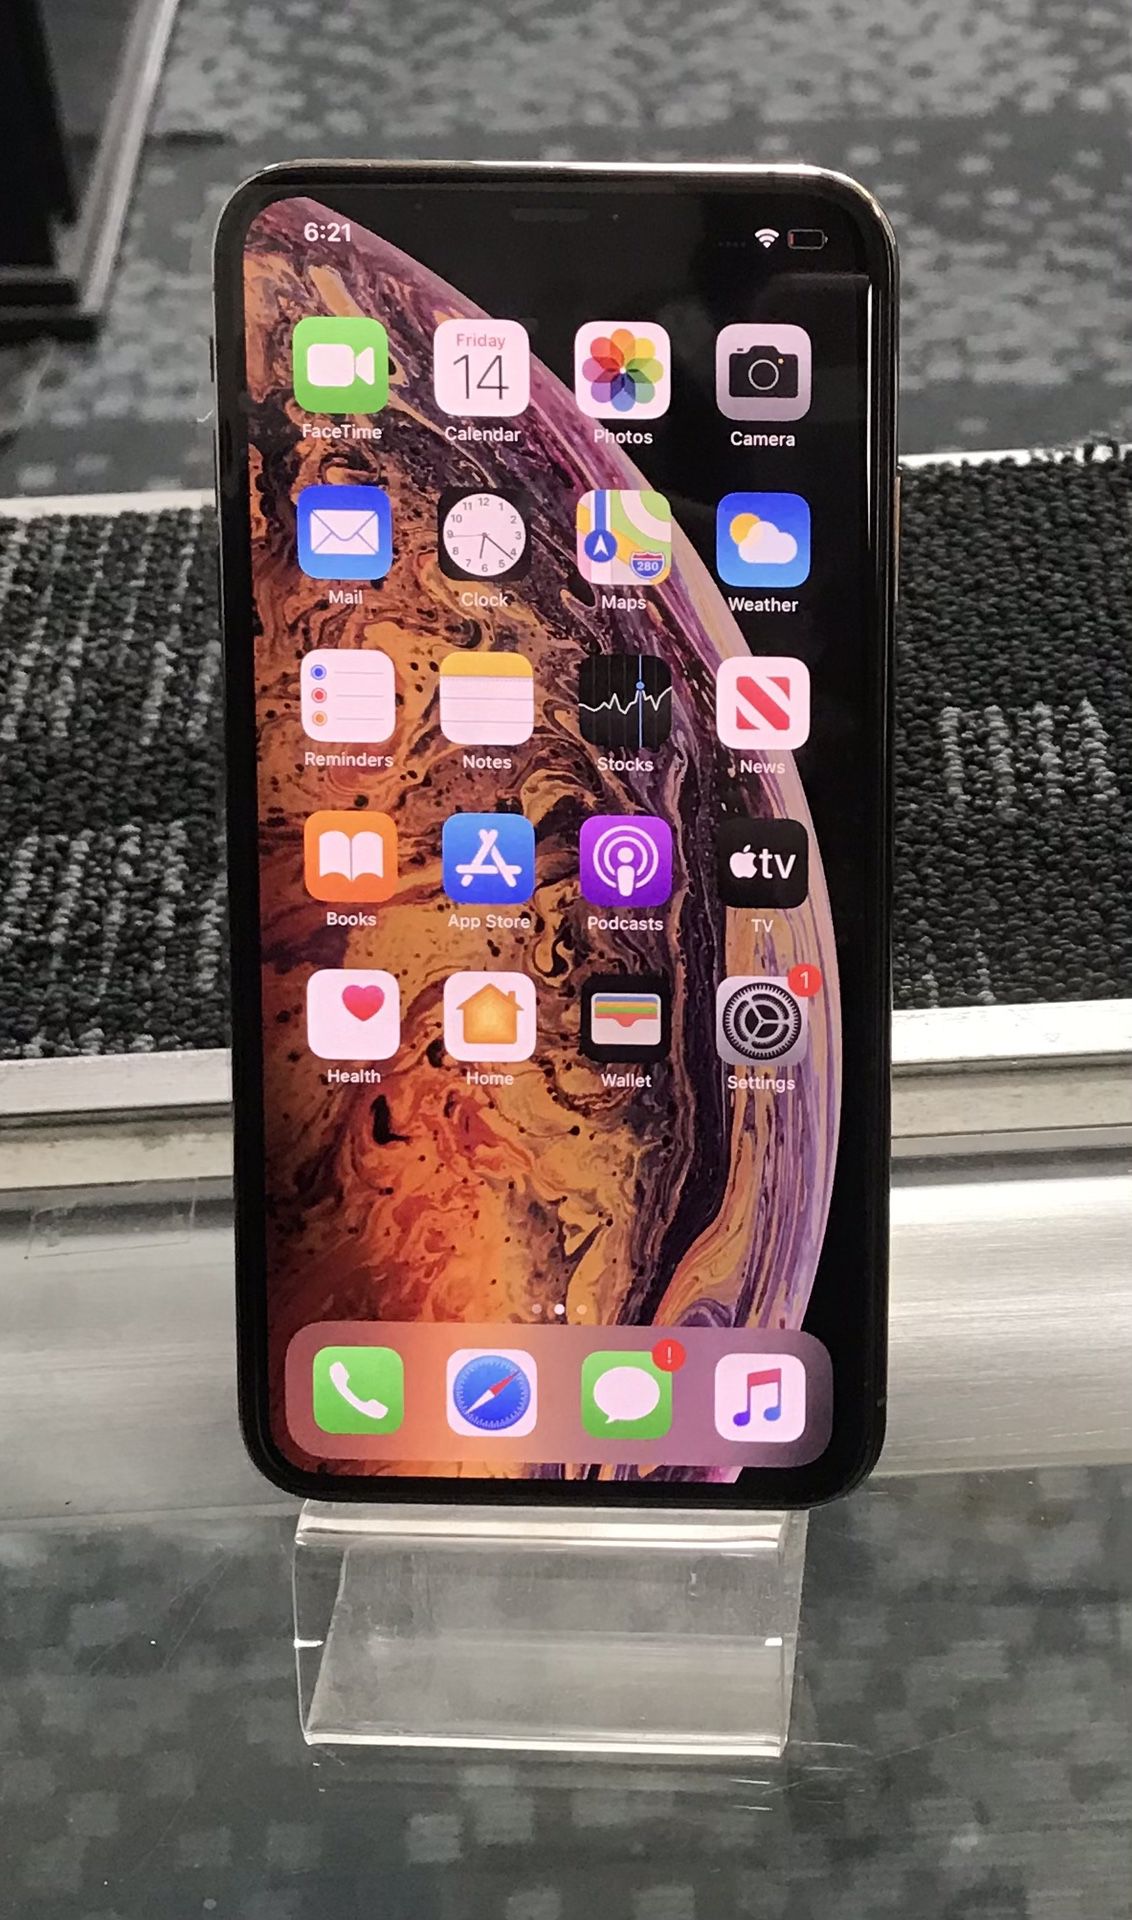 GRAND SALE!! APPLE IPHONE XS Max EXCELLENT CONDITION UNLOCK FOR ANY CARRIER WITH FREE ACTIVATION AND ACCESSORIES!!! HURRY UP LIMITED OFFER 